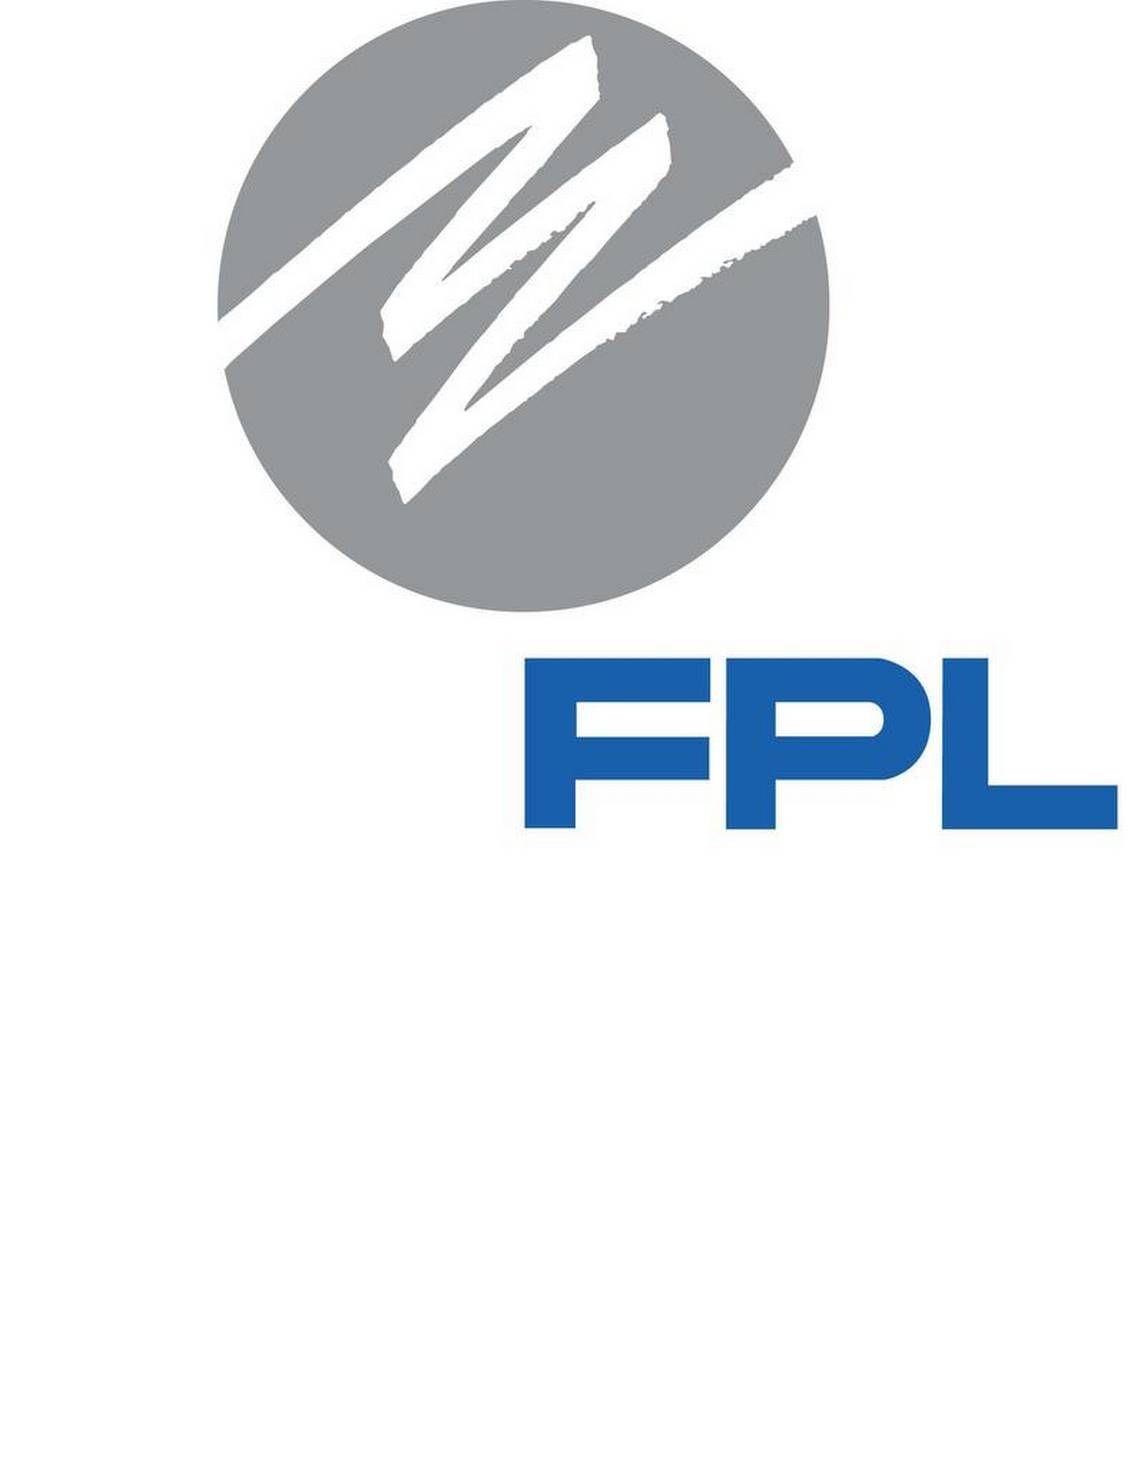 FPL Logo - FPL customers to pay for costs of responding to Hurricane Matthew ...